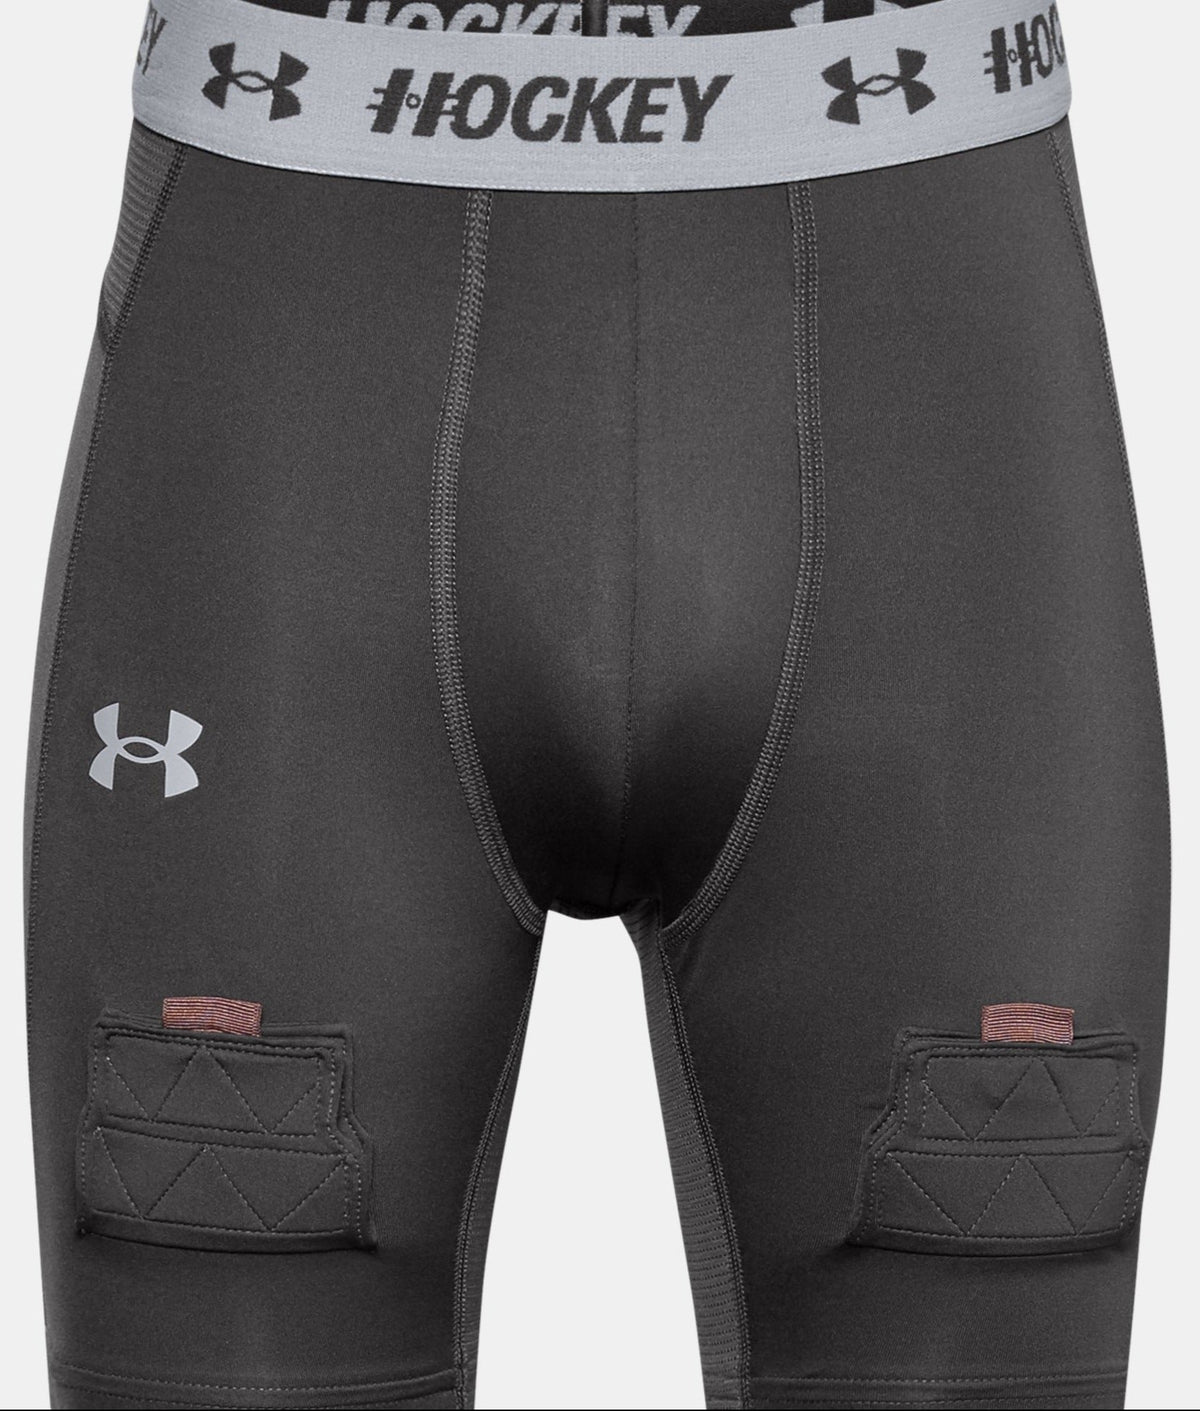 Elite Hockey Compression Short with Jock/Tabs for Boys